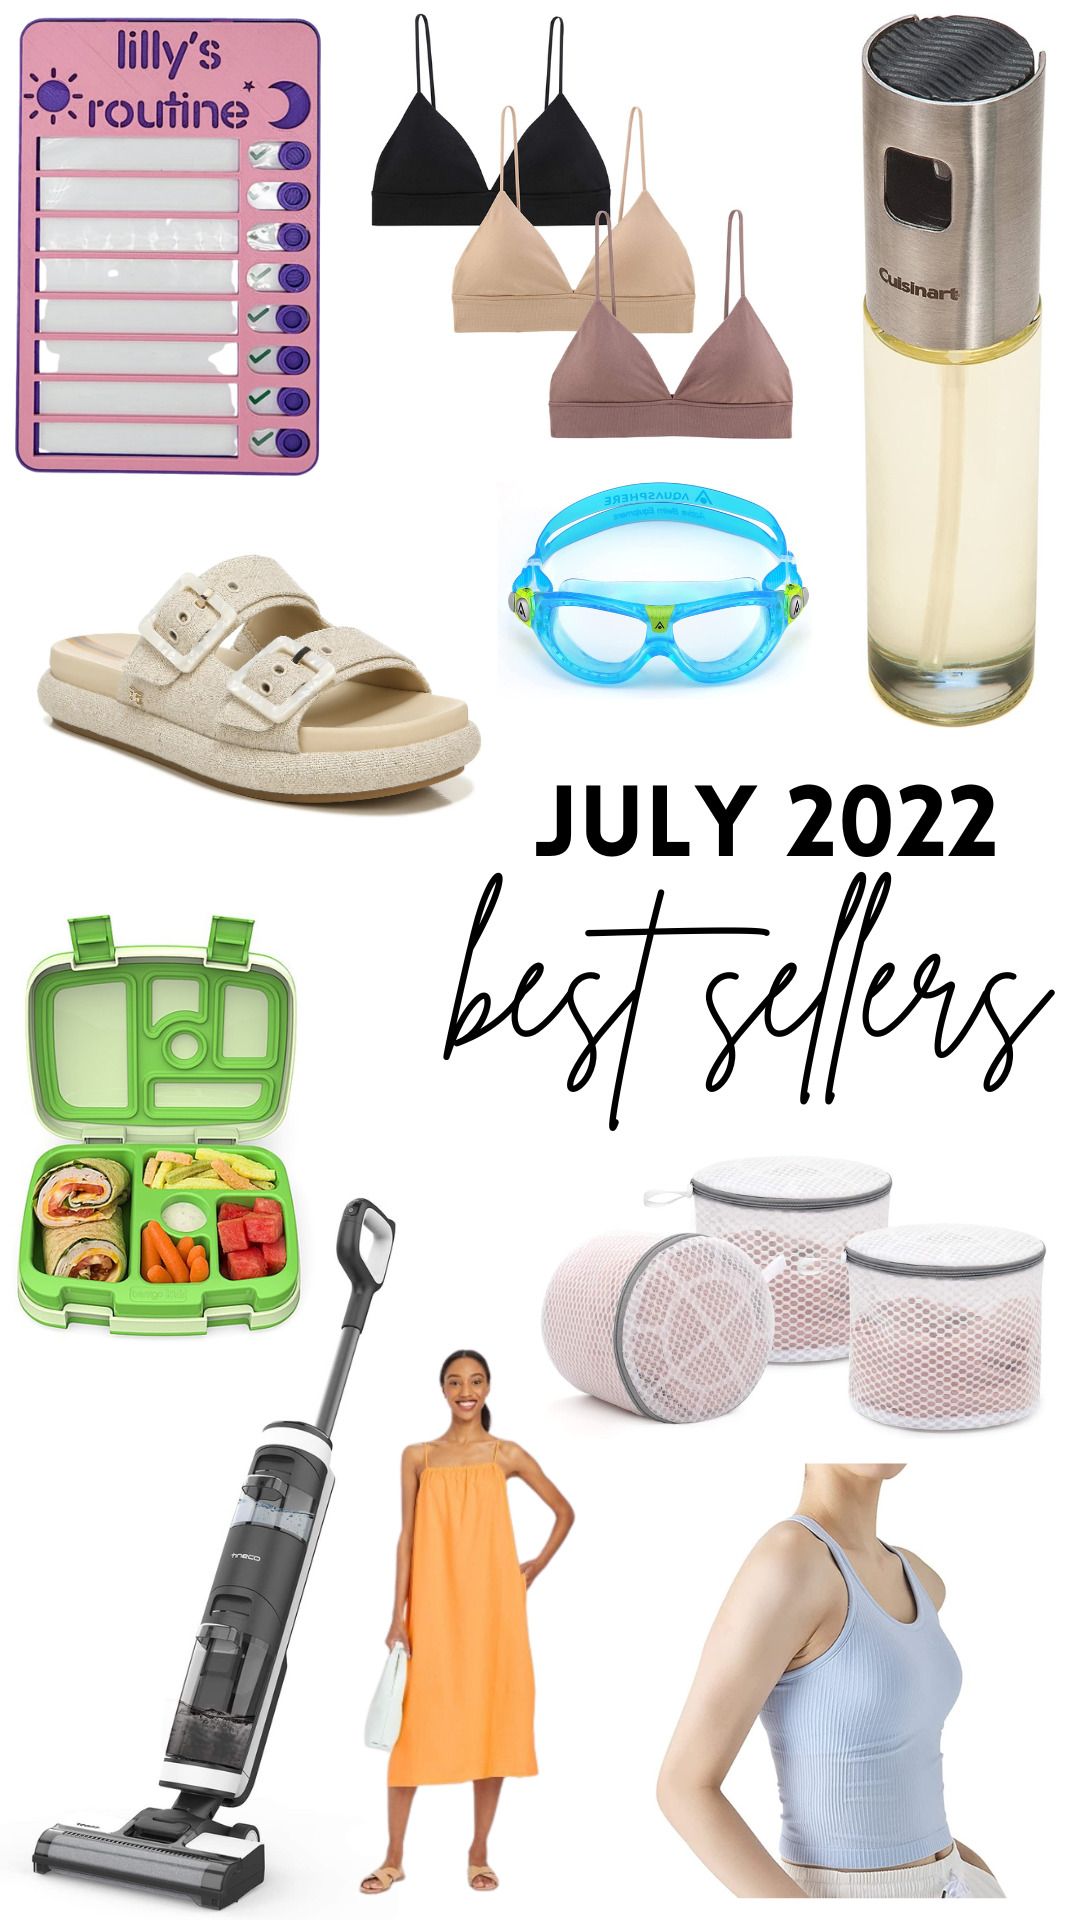 Mother's Day Gift Guide 2022 - Peanut Butter Fingers